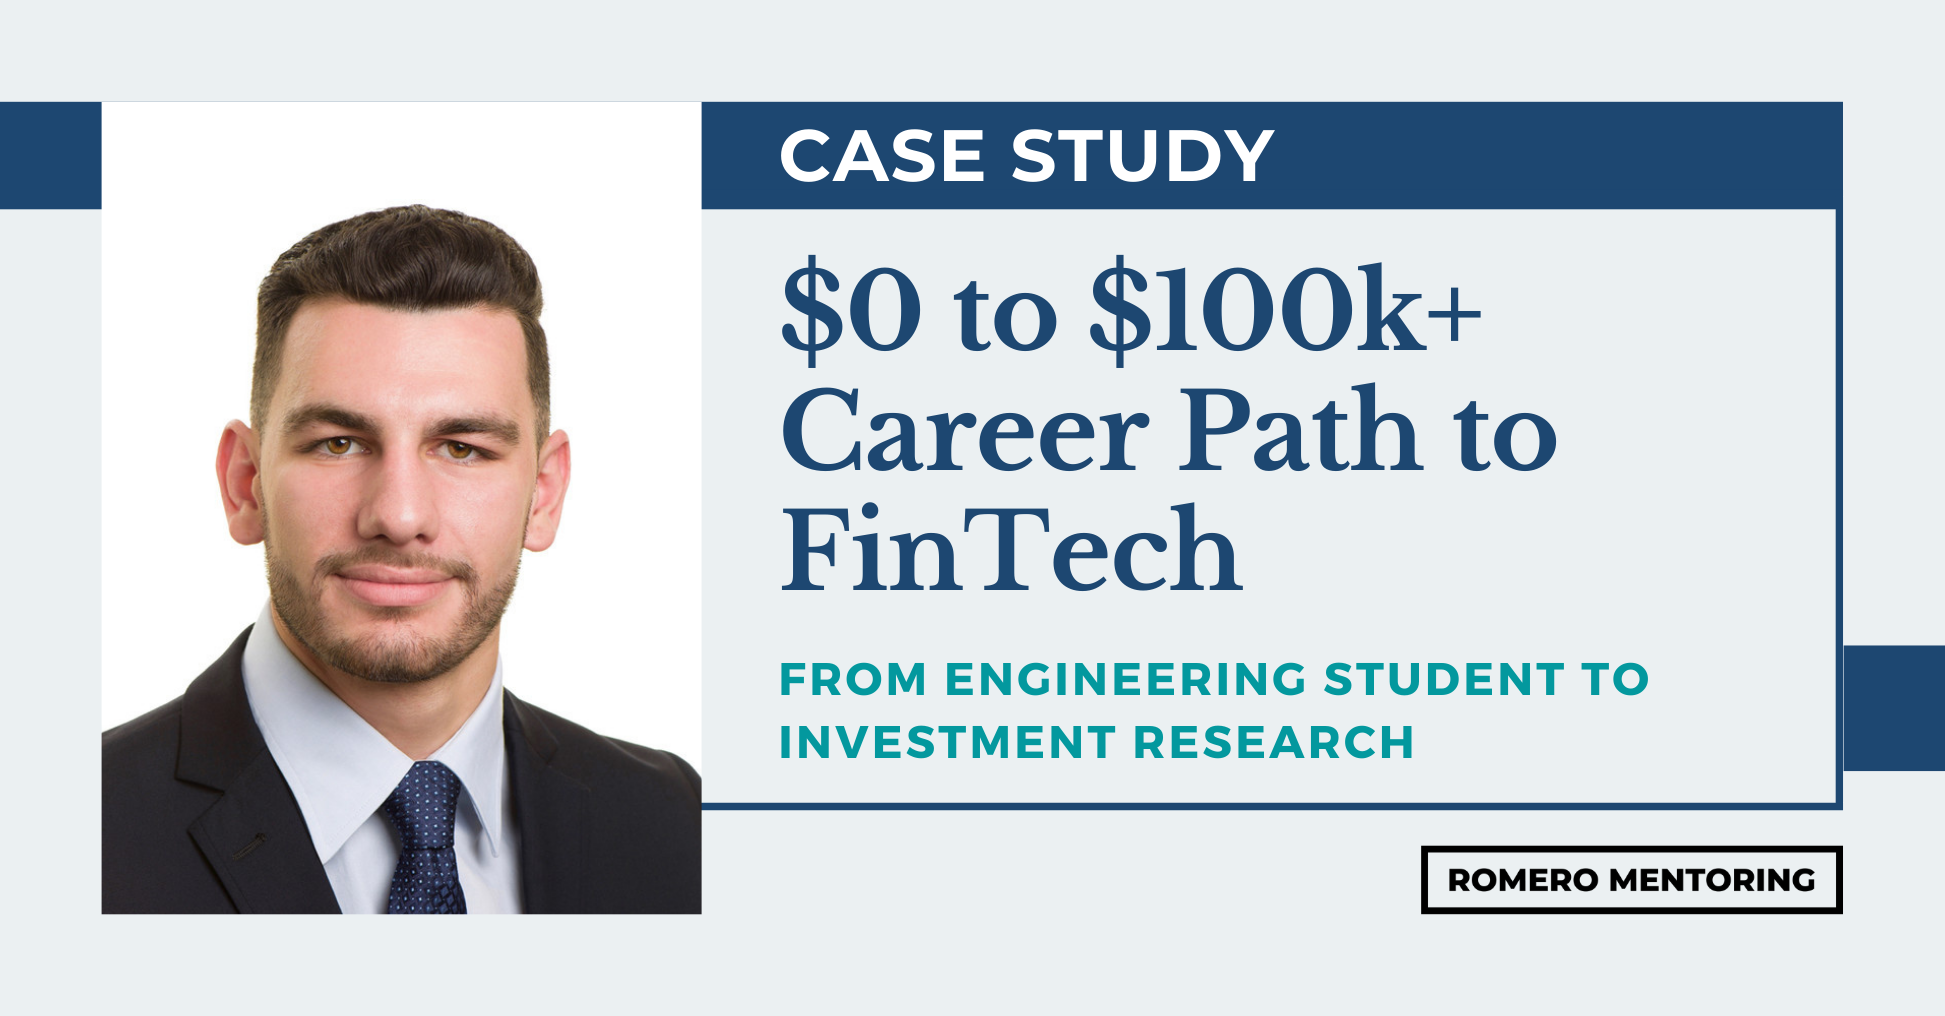 APP Student Goes From $0 to $100k+ Salary; Career Path to FinTech